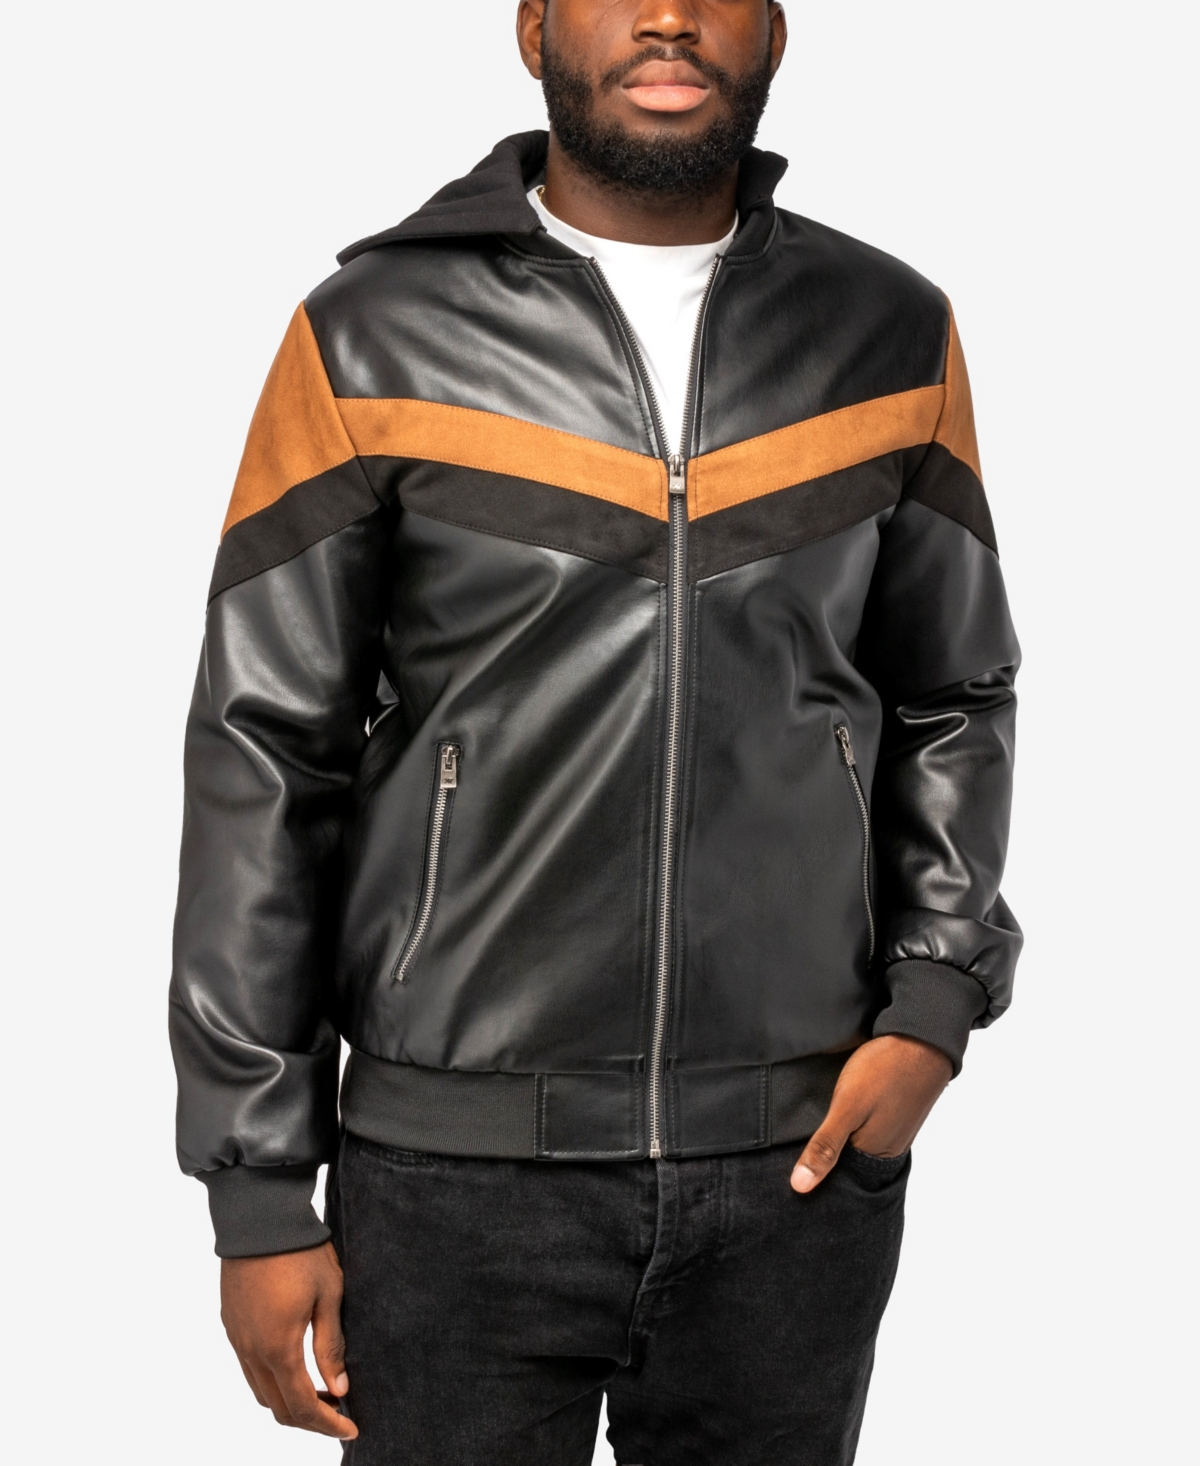 X-ray Men's Shiny Polyurethane And Faux Suede Detailing With Faux Shearling Lining Hooded Jacket In Black,brown